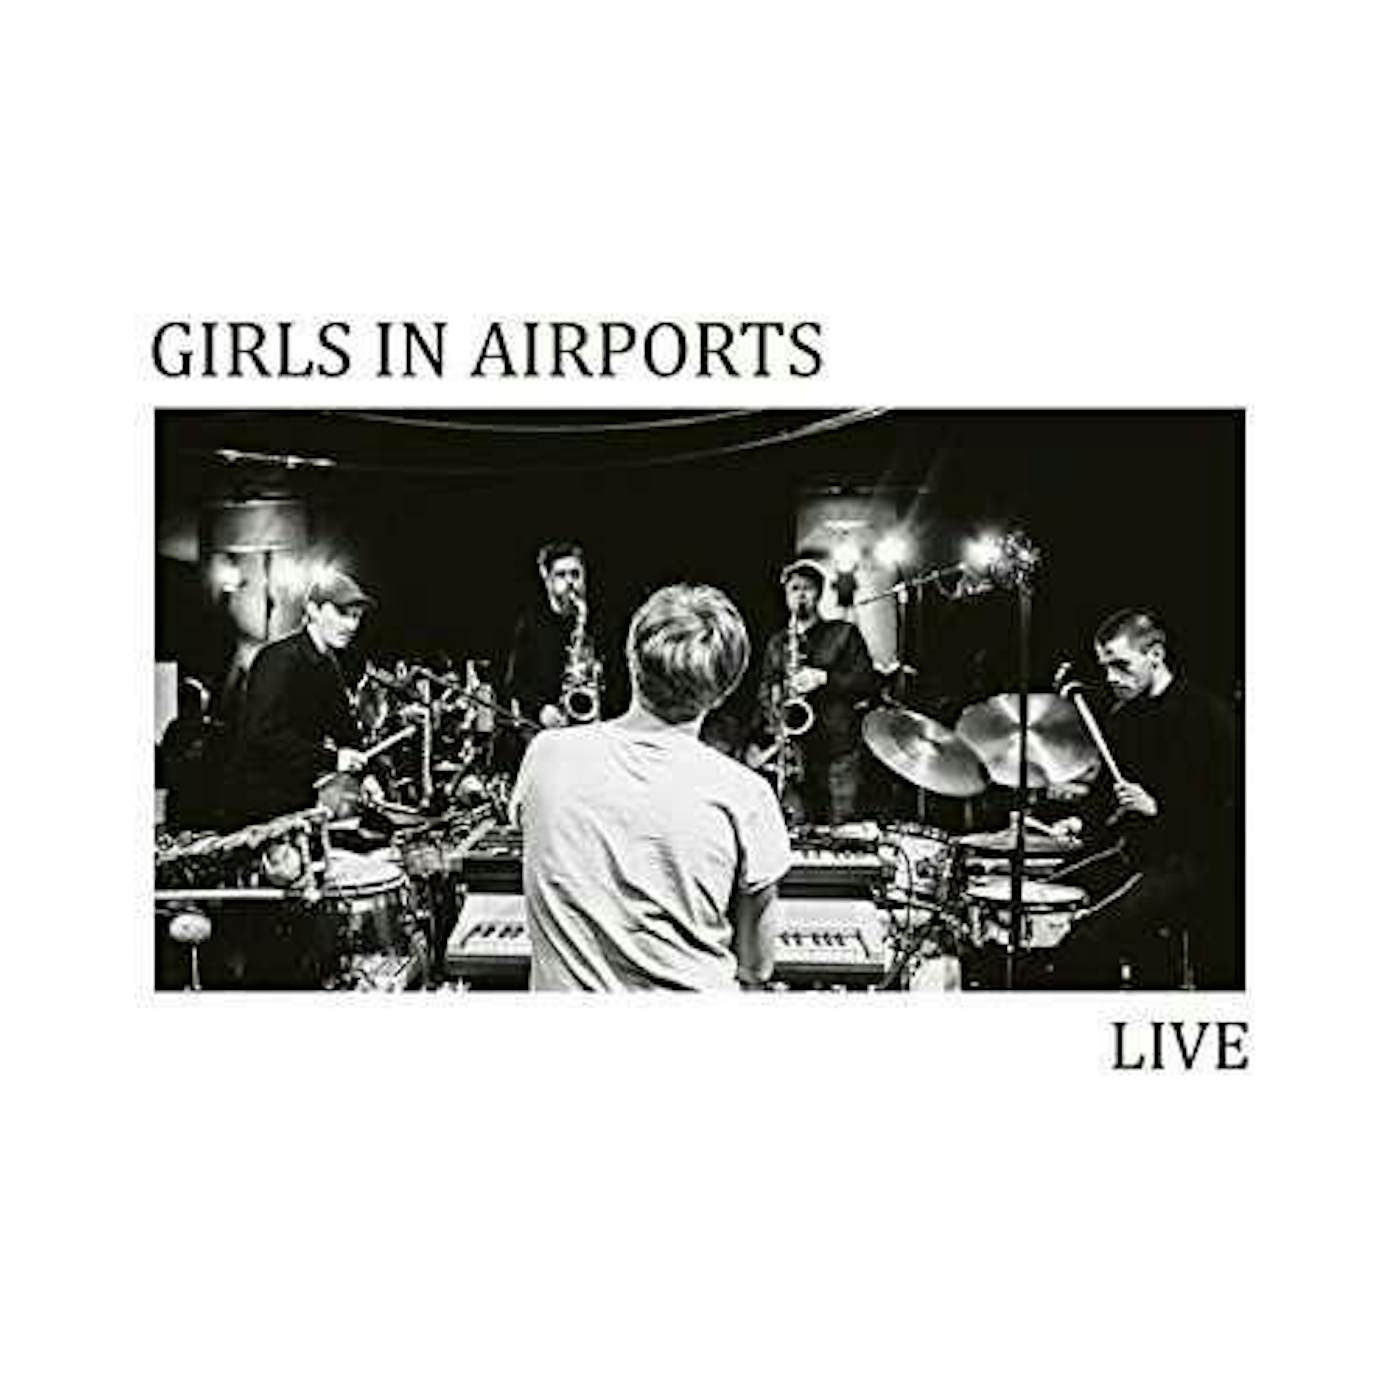 Girls in Airports Live Vinyl Record